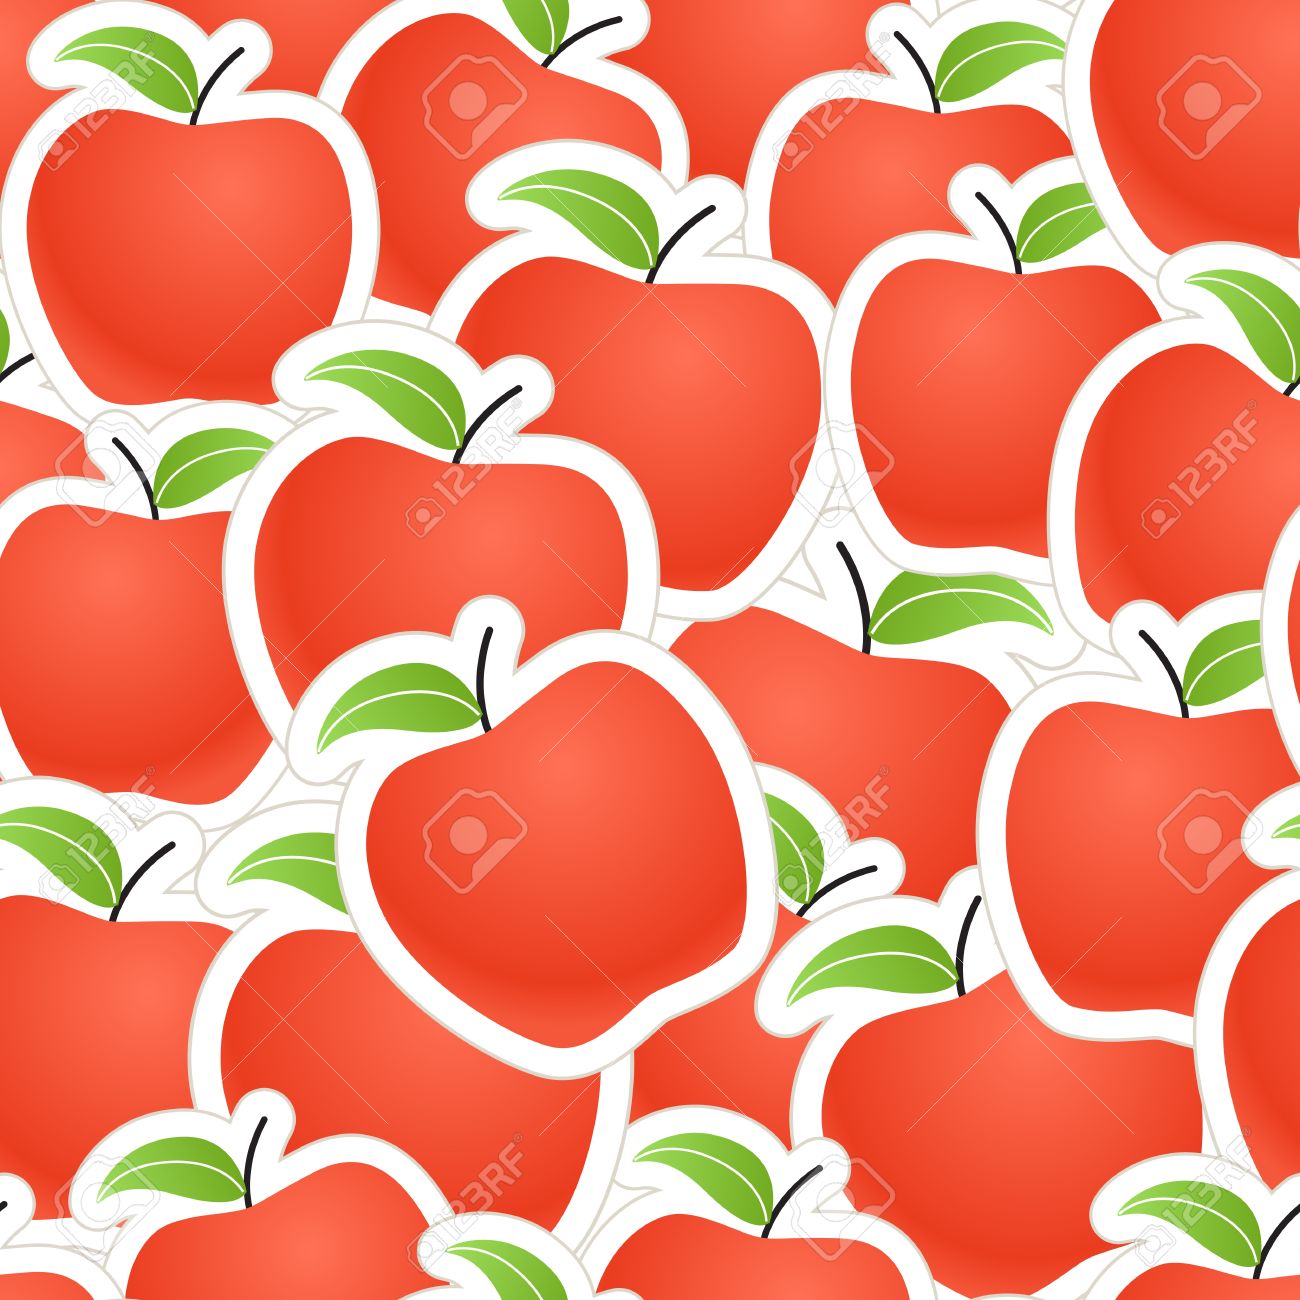 Red Apples Seamless Background Royalty Cliparts Vectors And